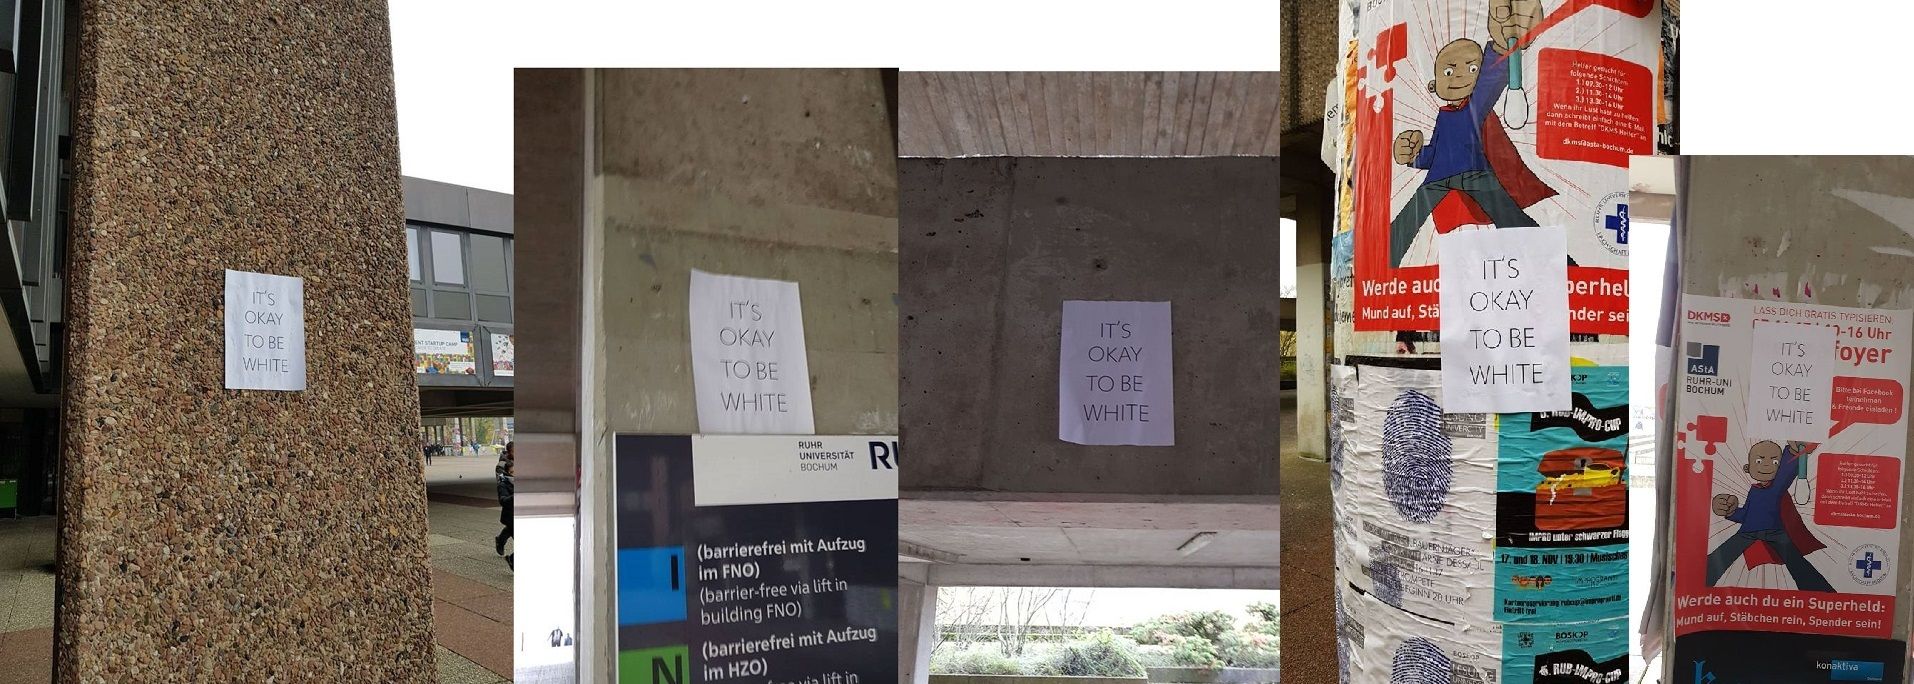 "Its okay to be white" in Bochum University, Germany. Lets see who gets triggered